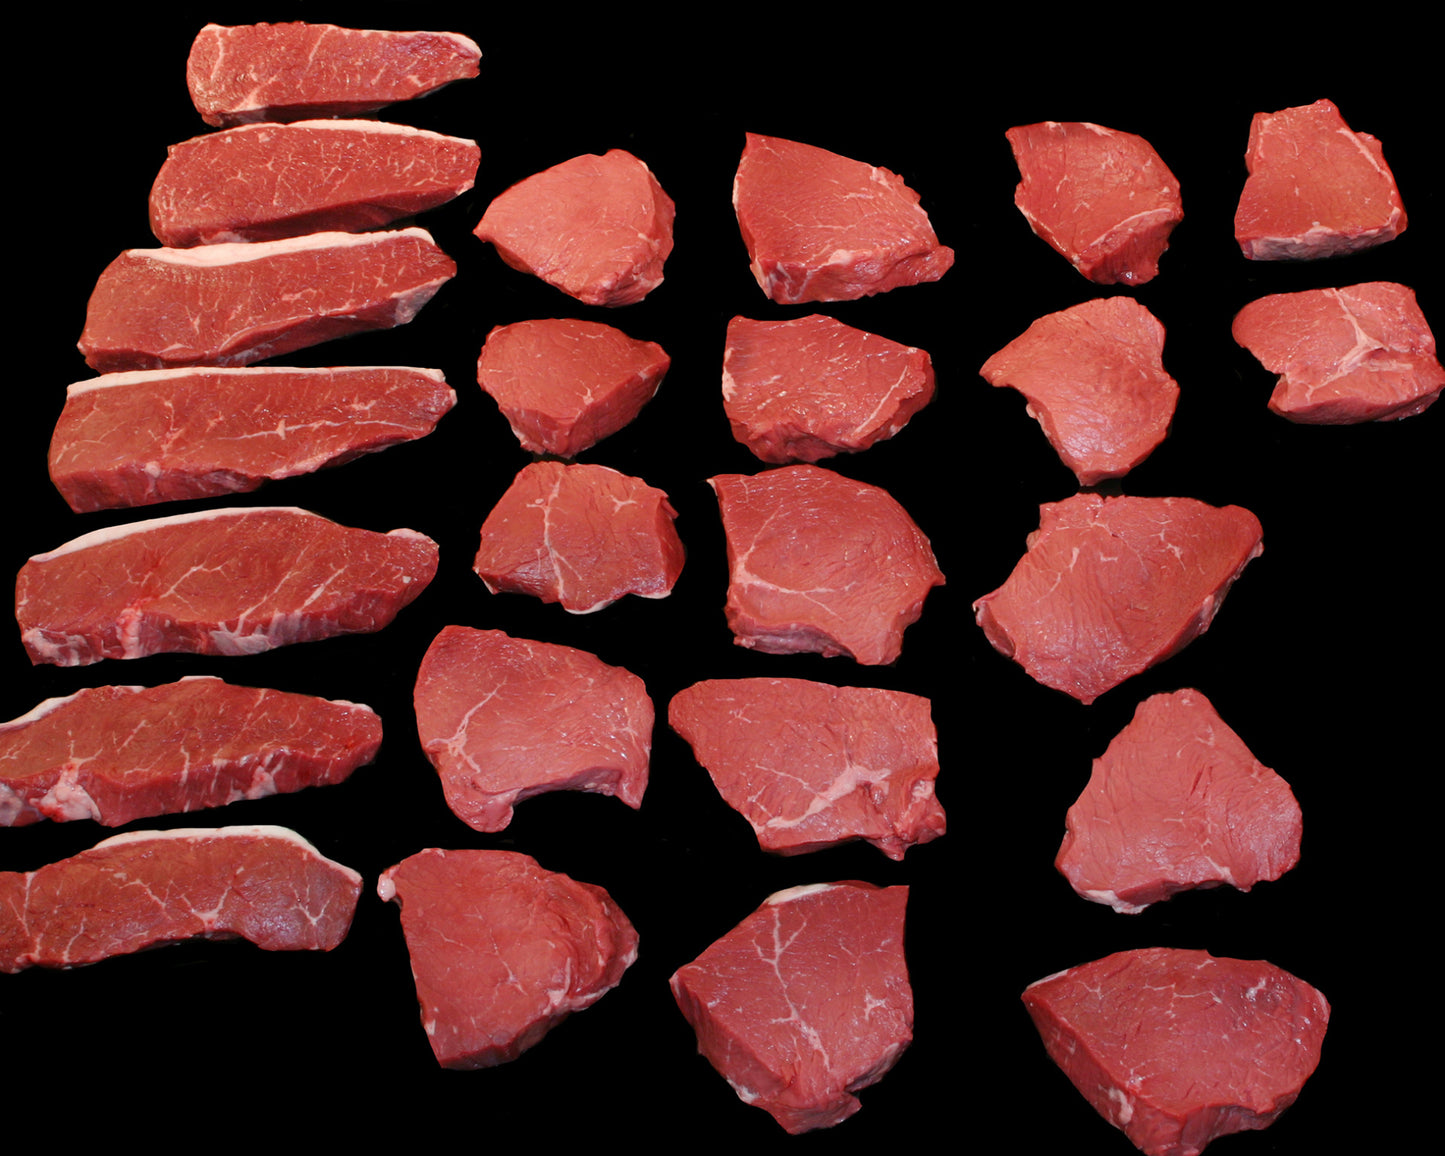 NEW ITEMS AVAILABLE - INDIVIDUAL STEAKS AND BEEF CUTS